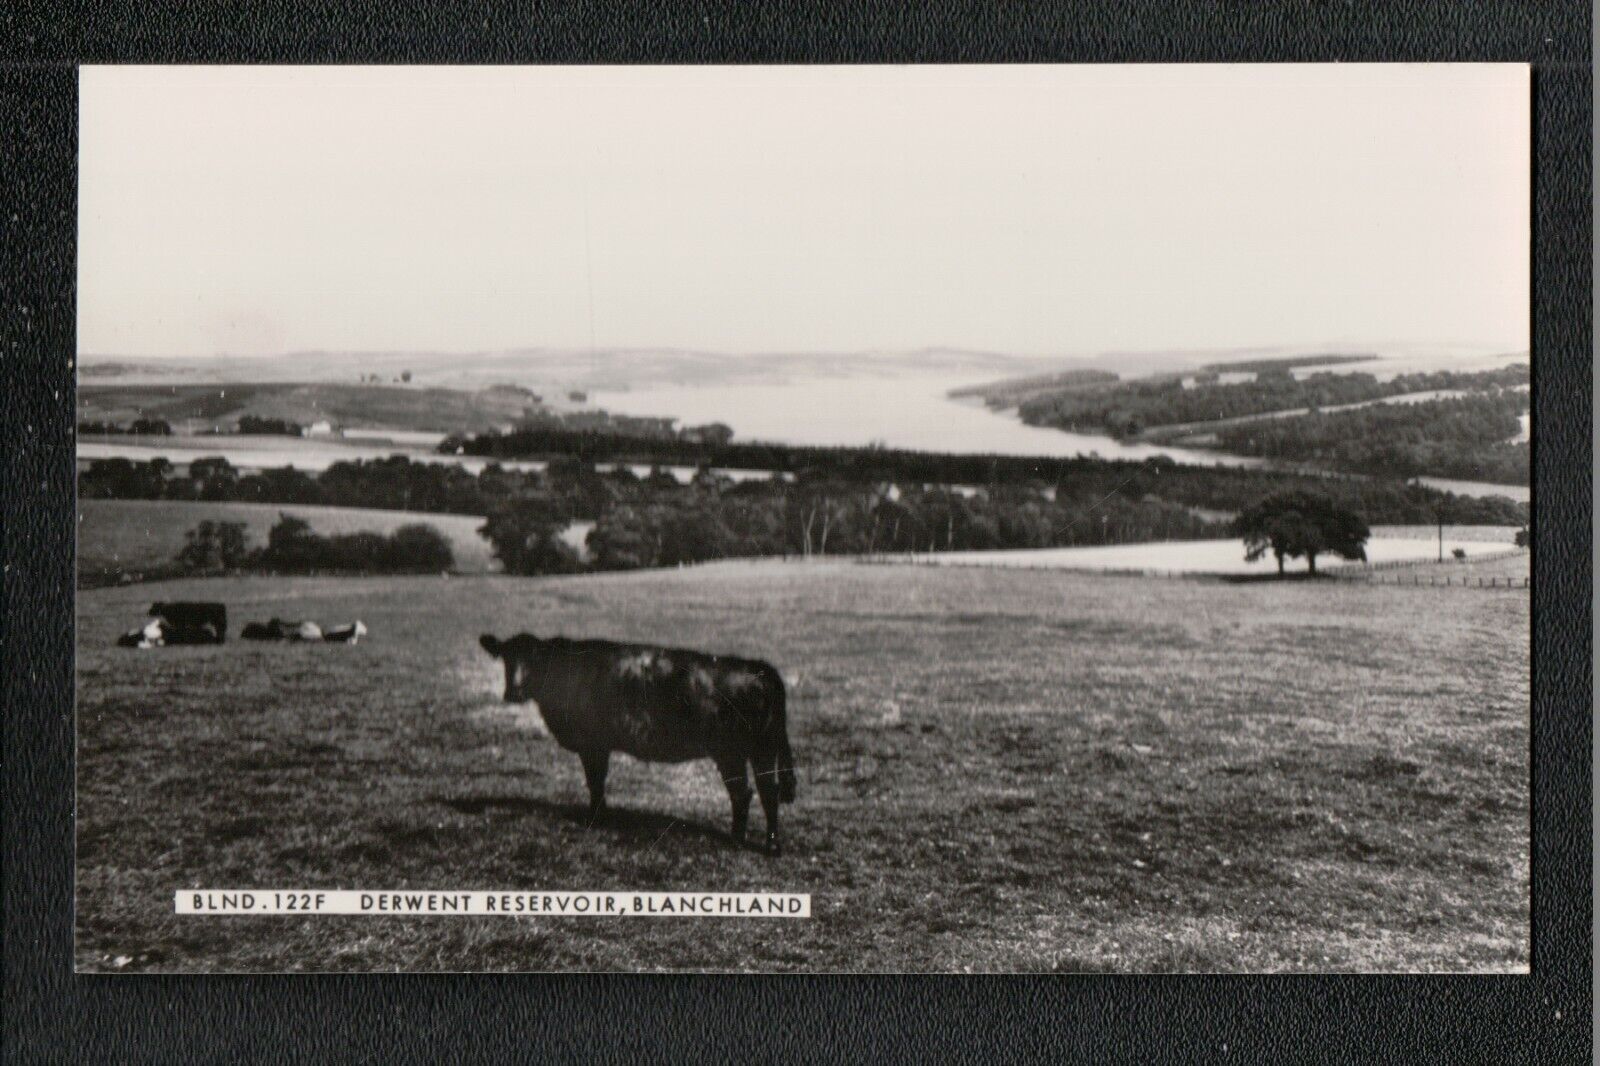 House Clearance - Derwent Reservoir Blanchland 1960's? F Frith Service Northumberland ~ COWS